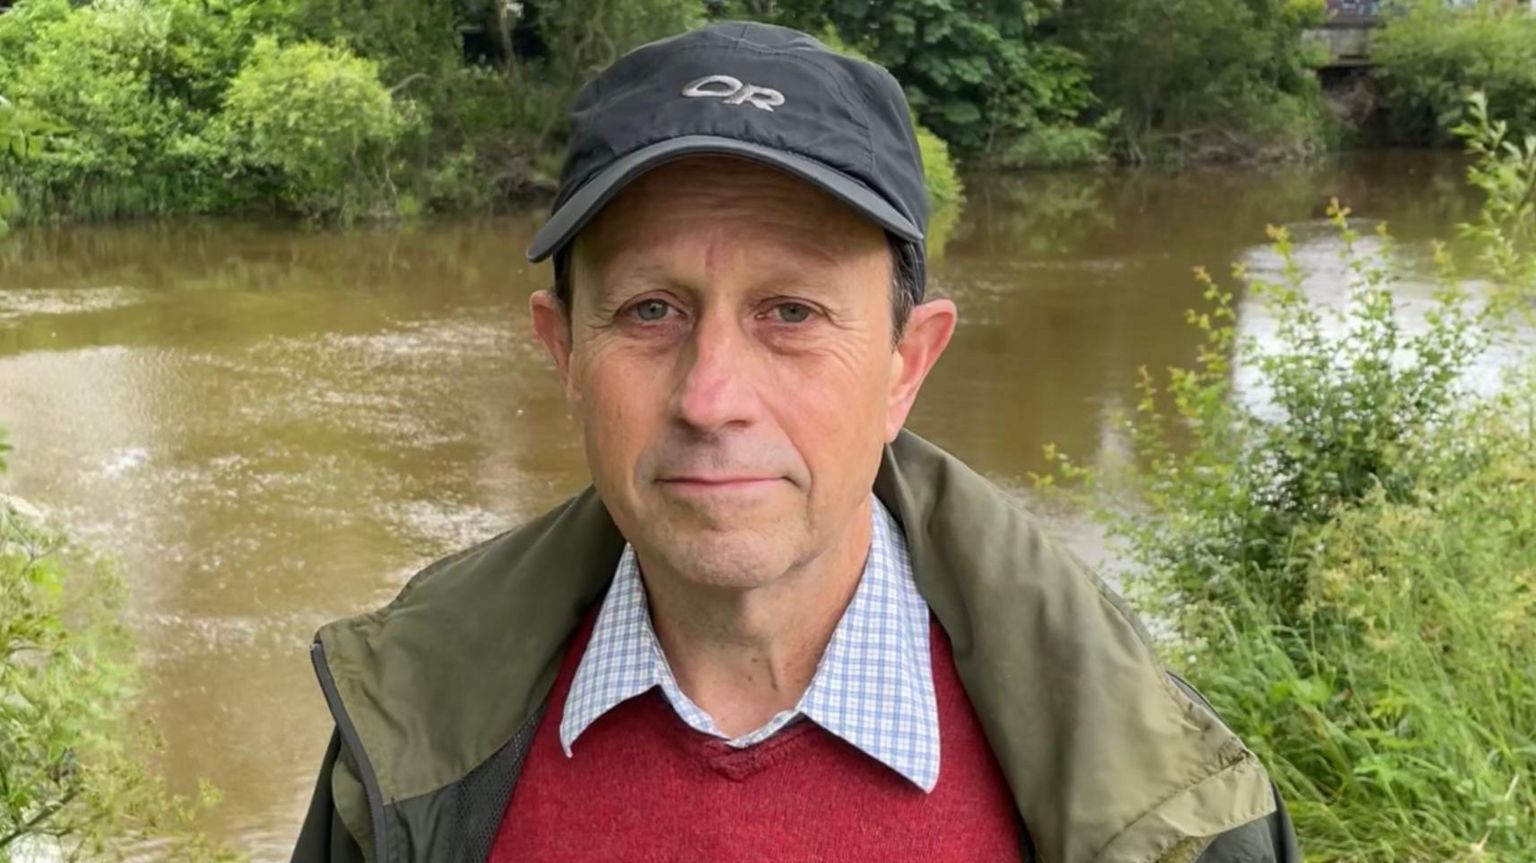 Campaigner stood by River Severn